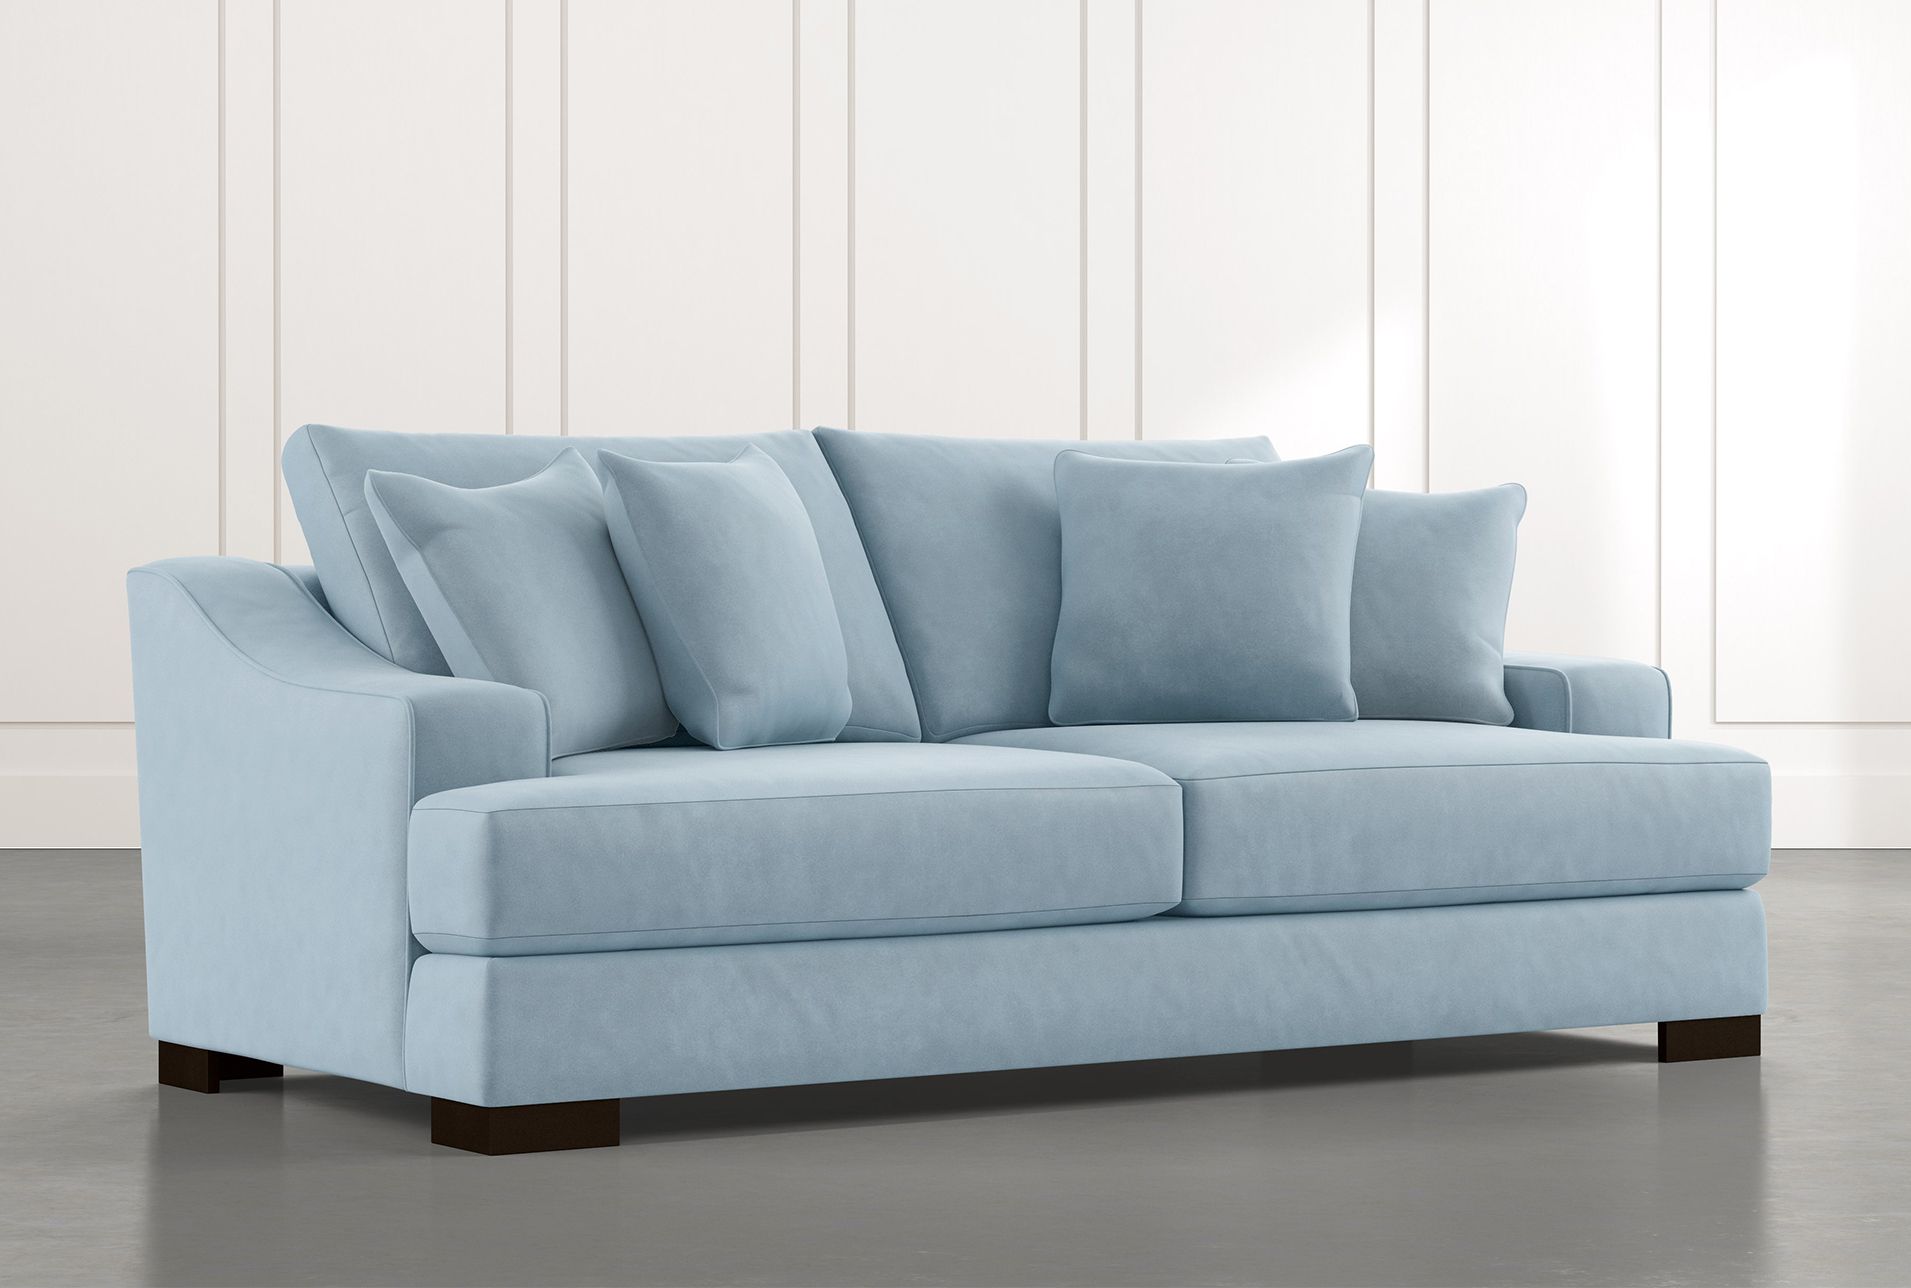 Lodge 96" Light Blue Sofa | Living Spaces Pertaining To Modern Blue Linen Sofas (View 9 of 20)